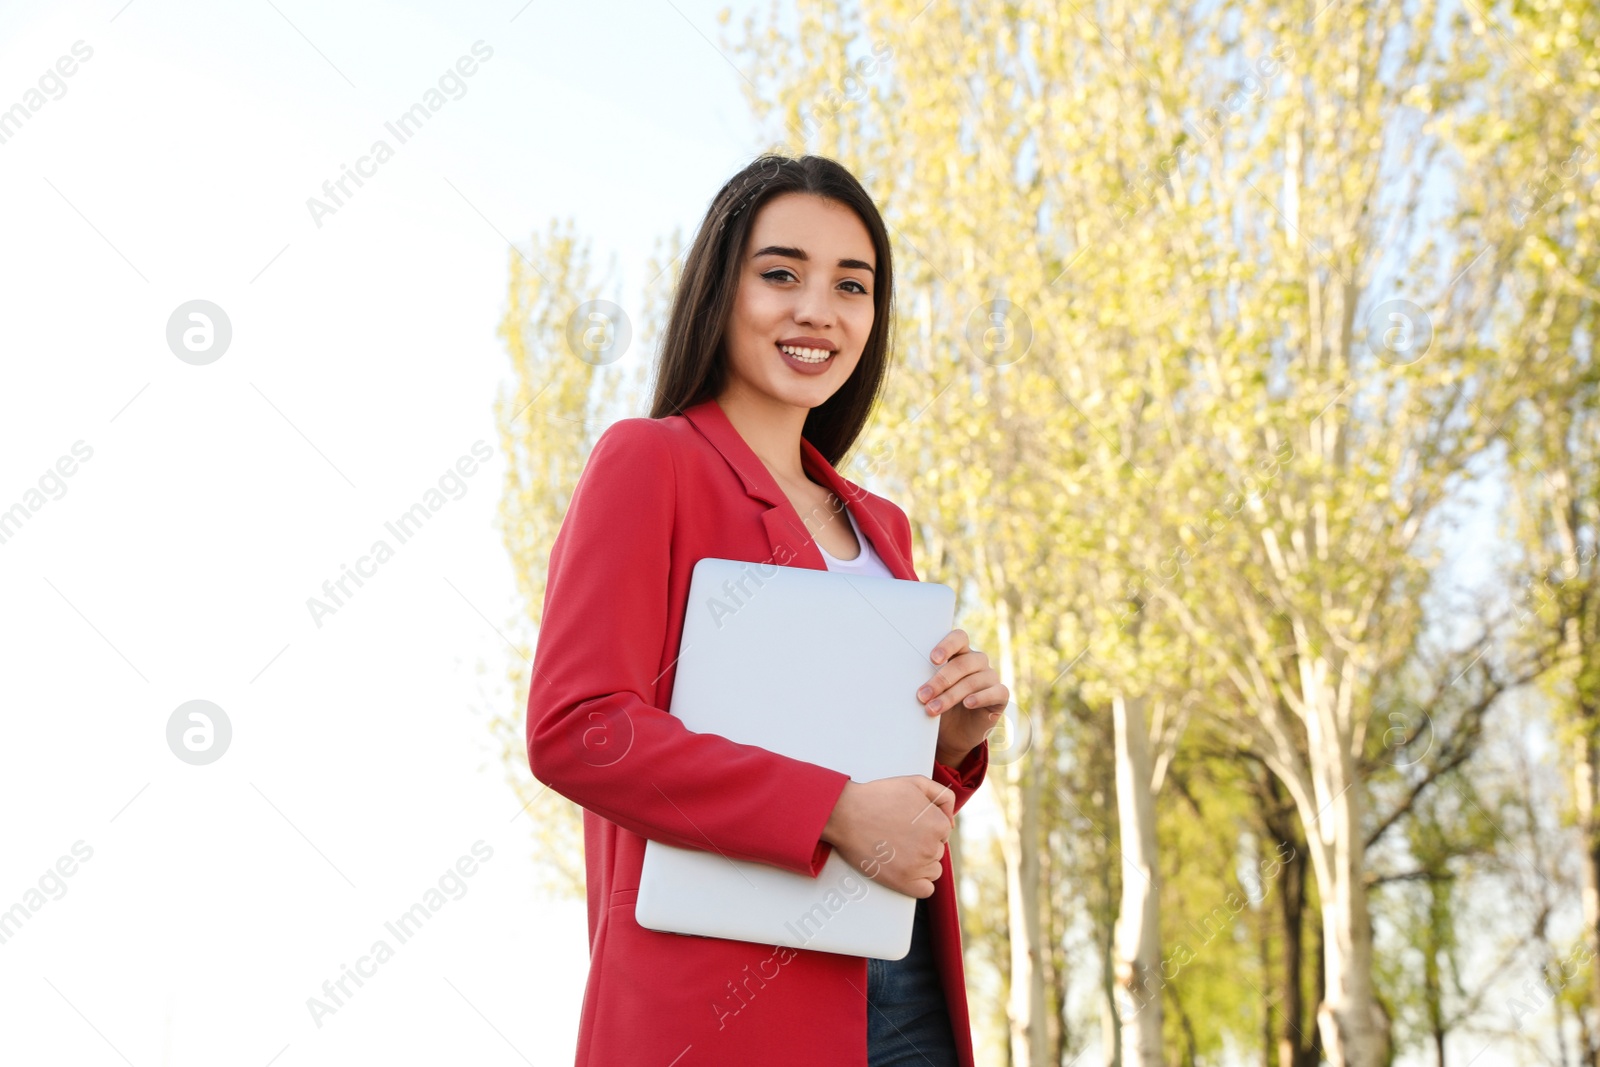 Image of Happy young woman with laptop walking outdoors